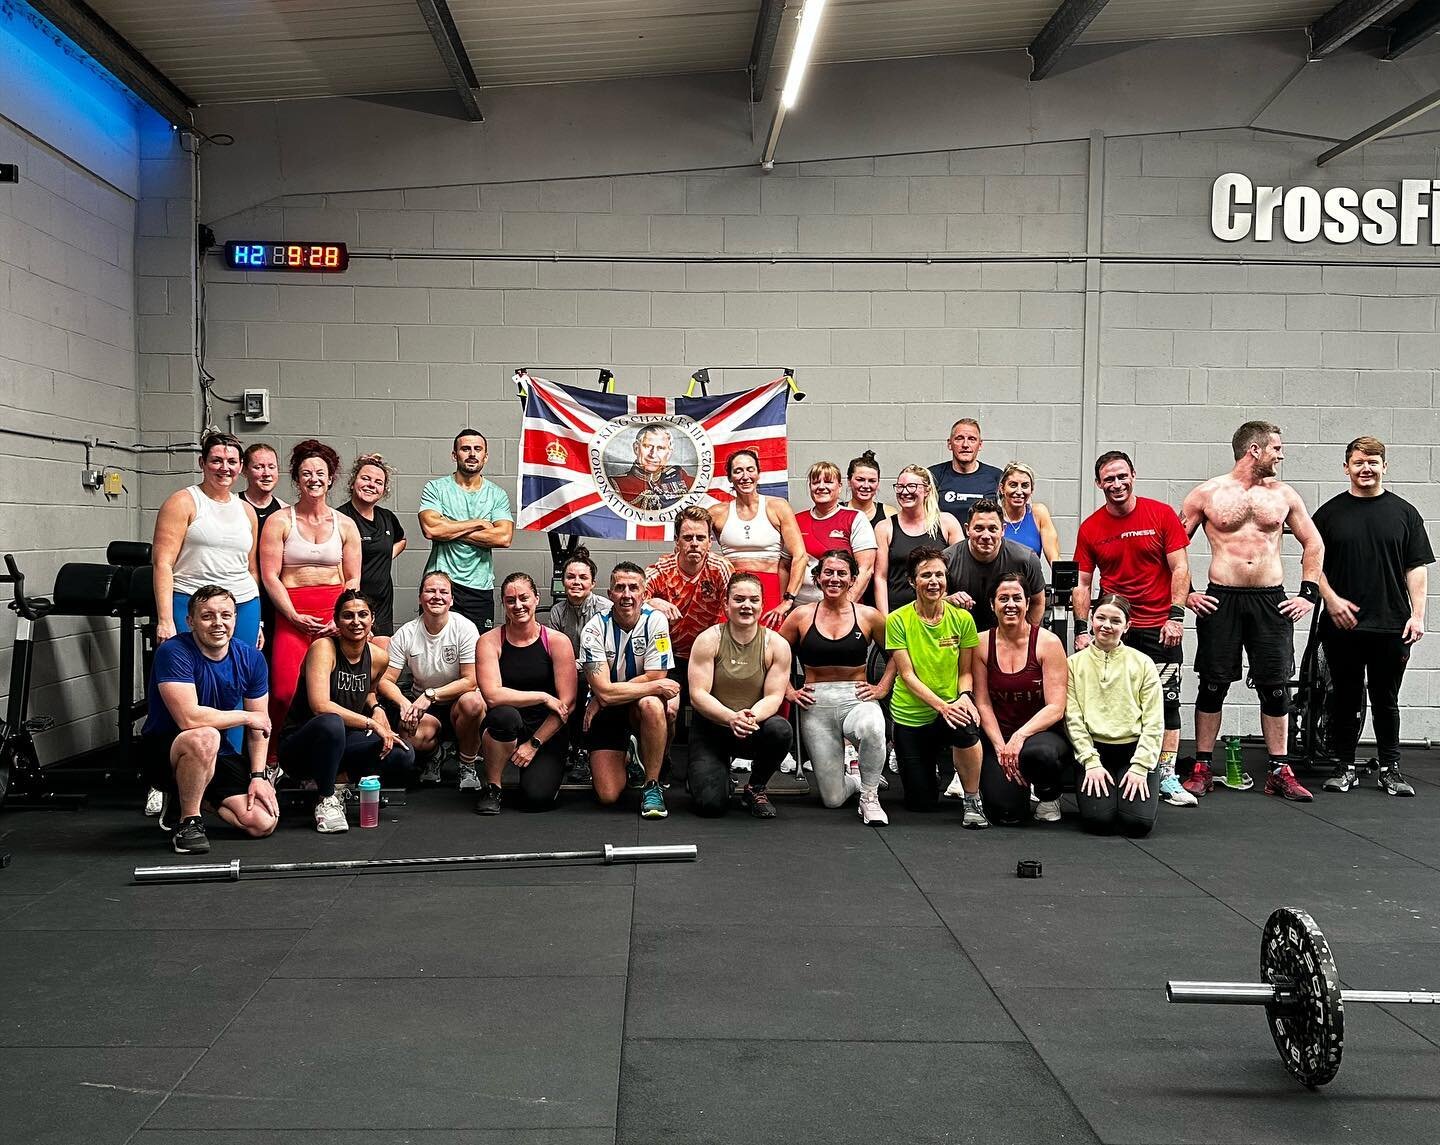 Saturday&rsquo;s with Charlie.
Whatever your thoughts on the Coronation enjoy the Bank Holiday with friends and family 💜 #crossfithuddersfield #crossfituk #kingcharles #coronation #workout #fitness #wod